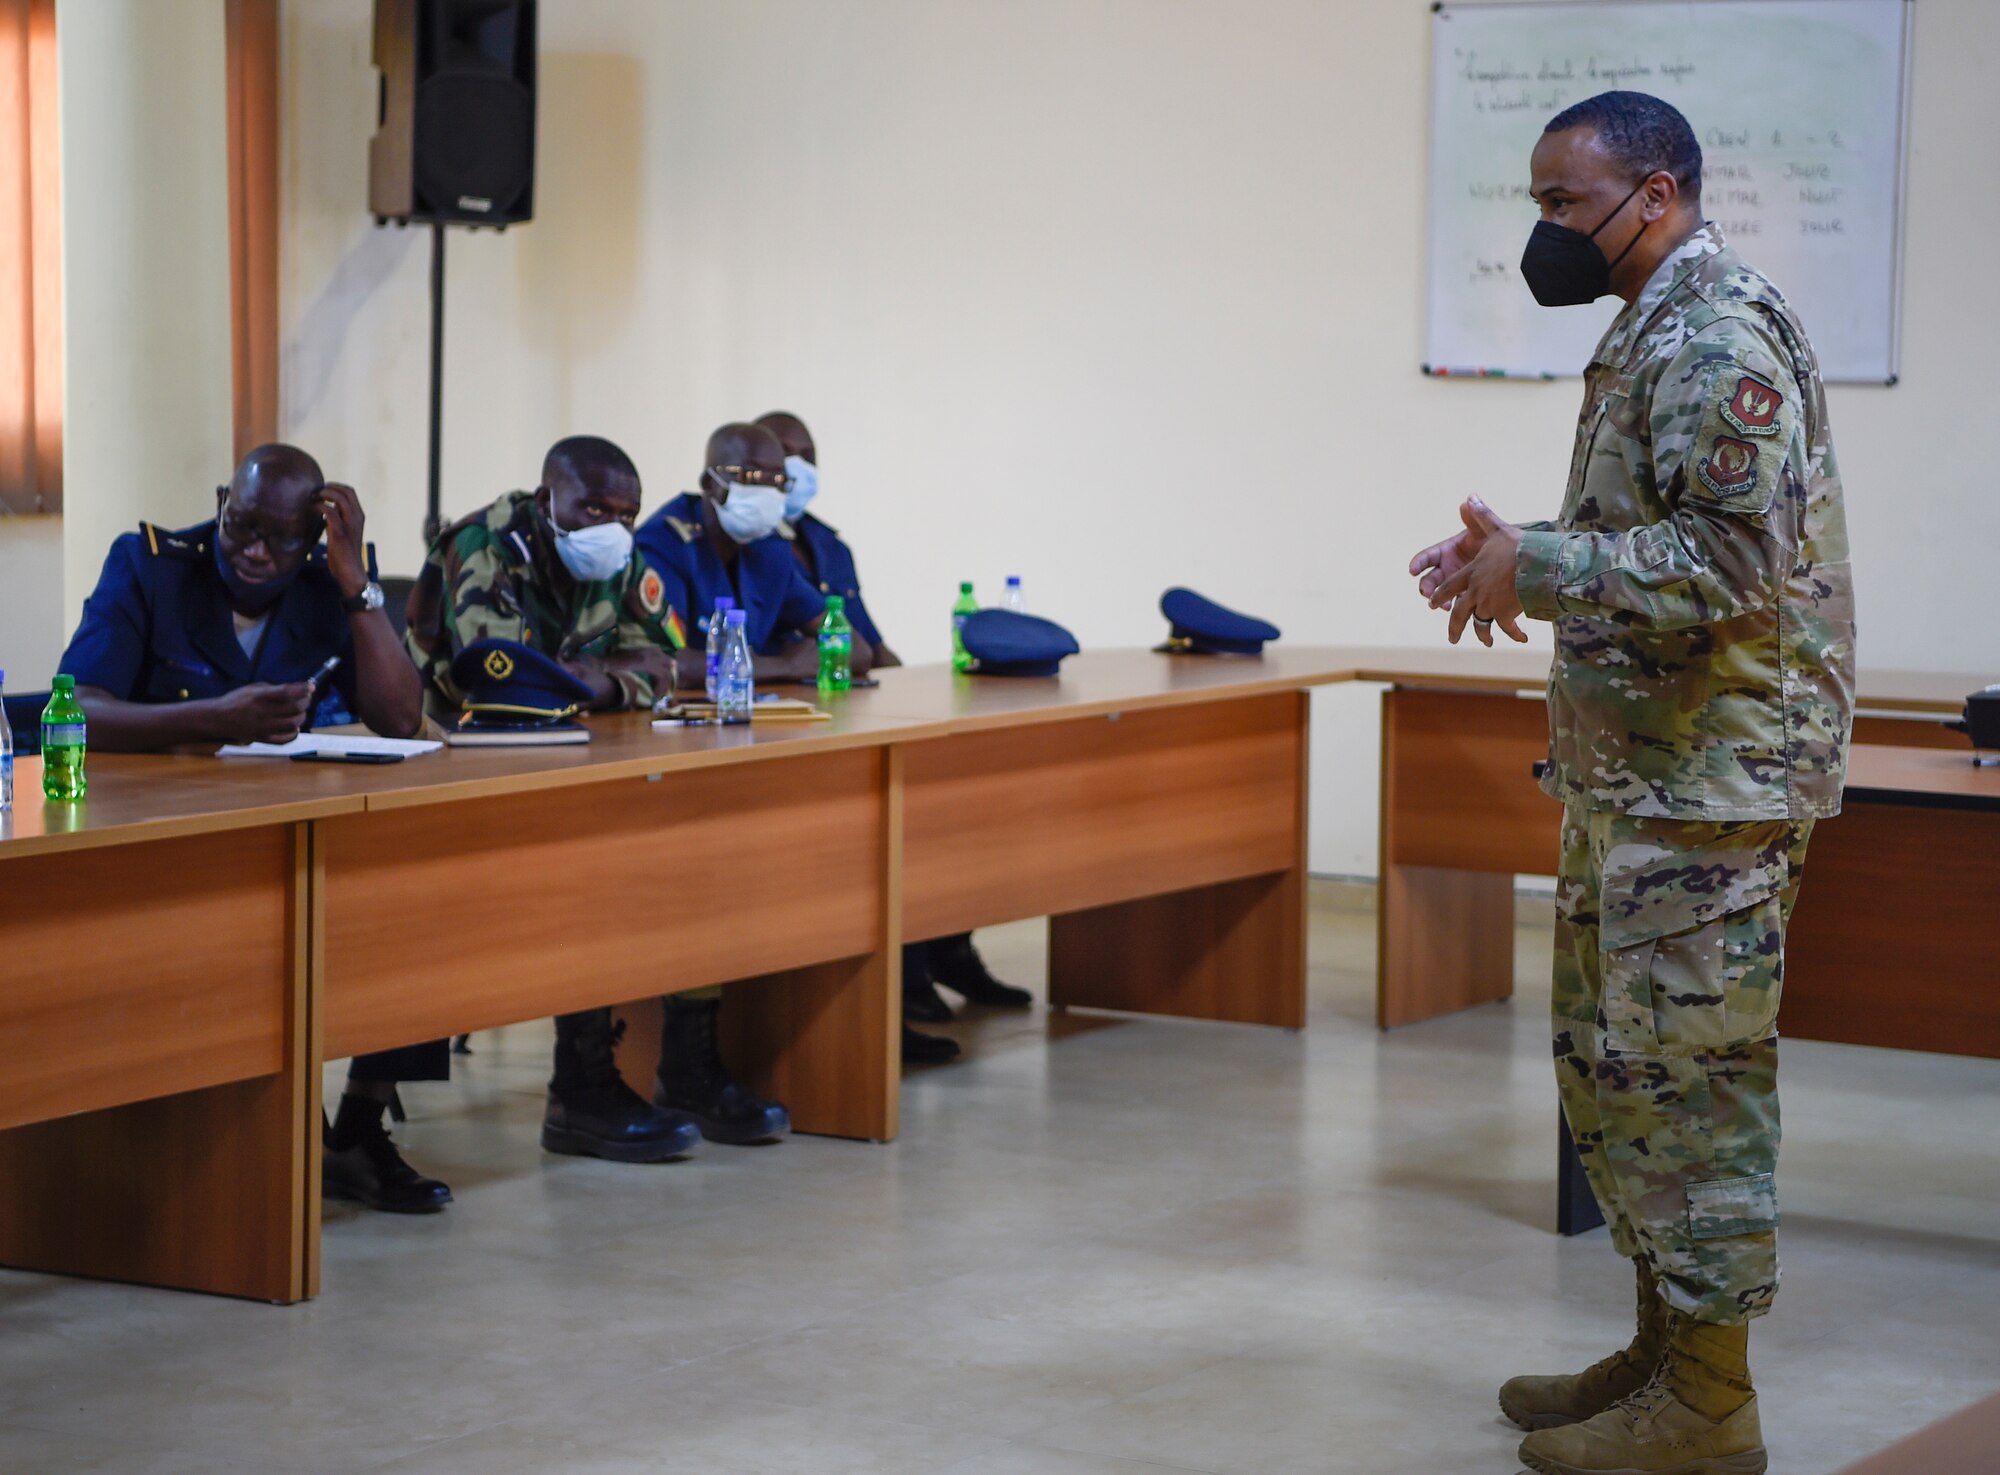 Chief Master Sgt. Terrance Smiley, Kisling Non-commissioned Officer Academy commandant, discusses leadership and followership with Senegalese air force members in Thies, Senegal, May 26, 2021. Throughout the engagement, Airmen facilitated several discussions with their Senegalese peers on topics such as leadership, airmanship, administrative processes, doctrine and personnel management. (U.S. Air Force photo by 1st Lt. Hannah Durbin)